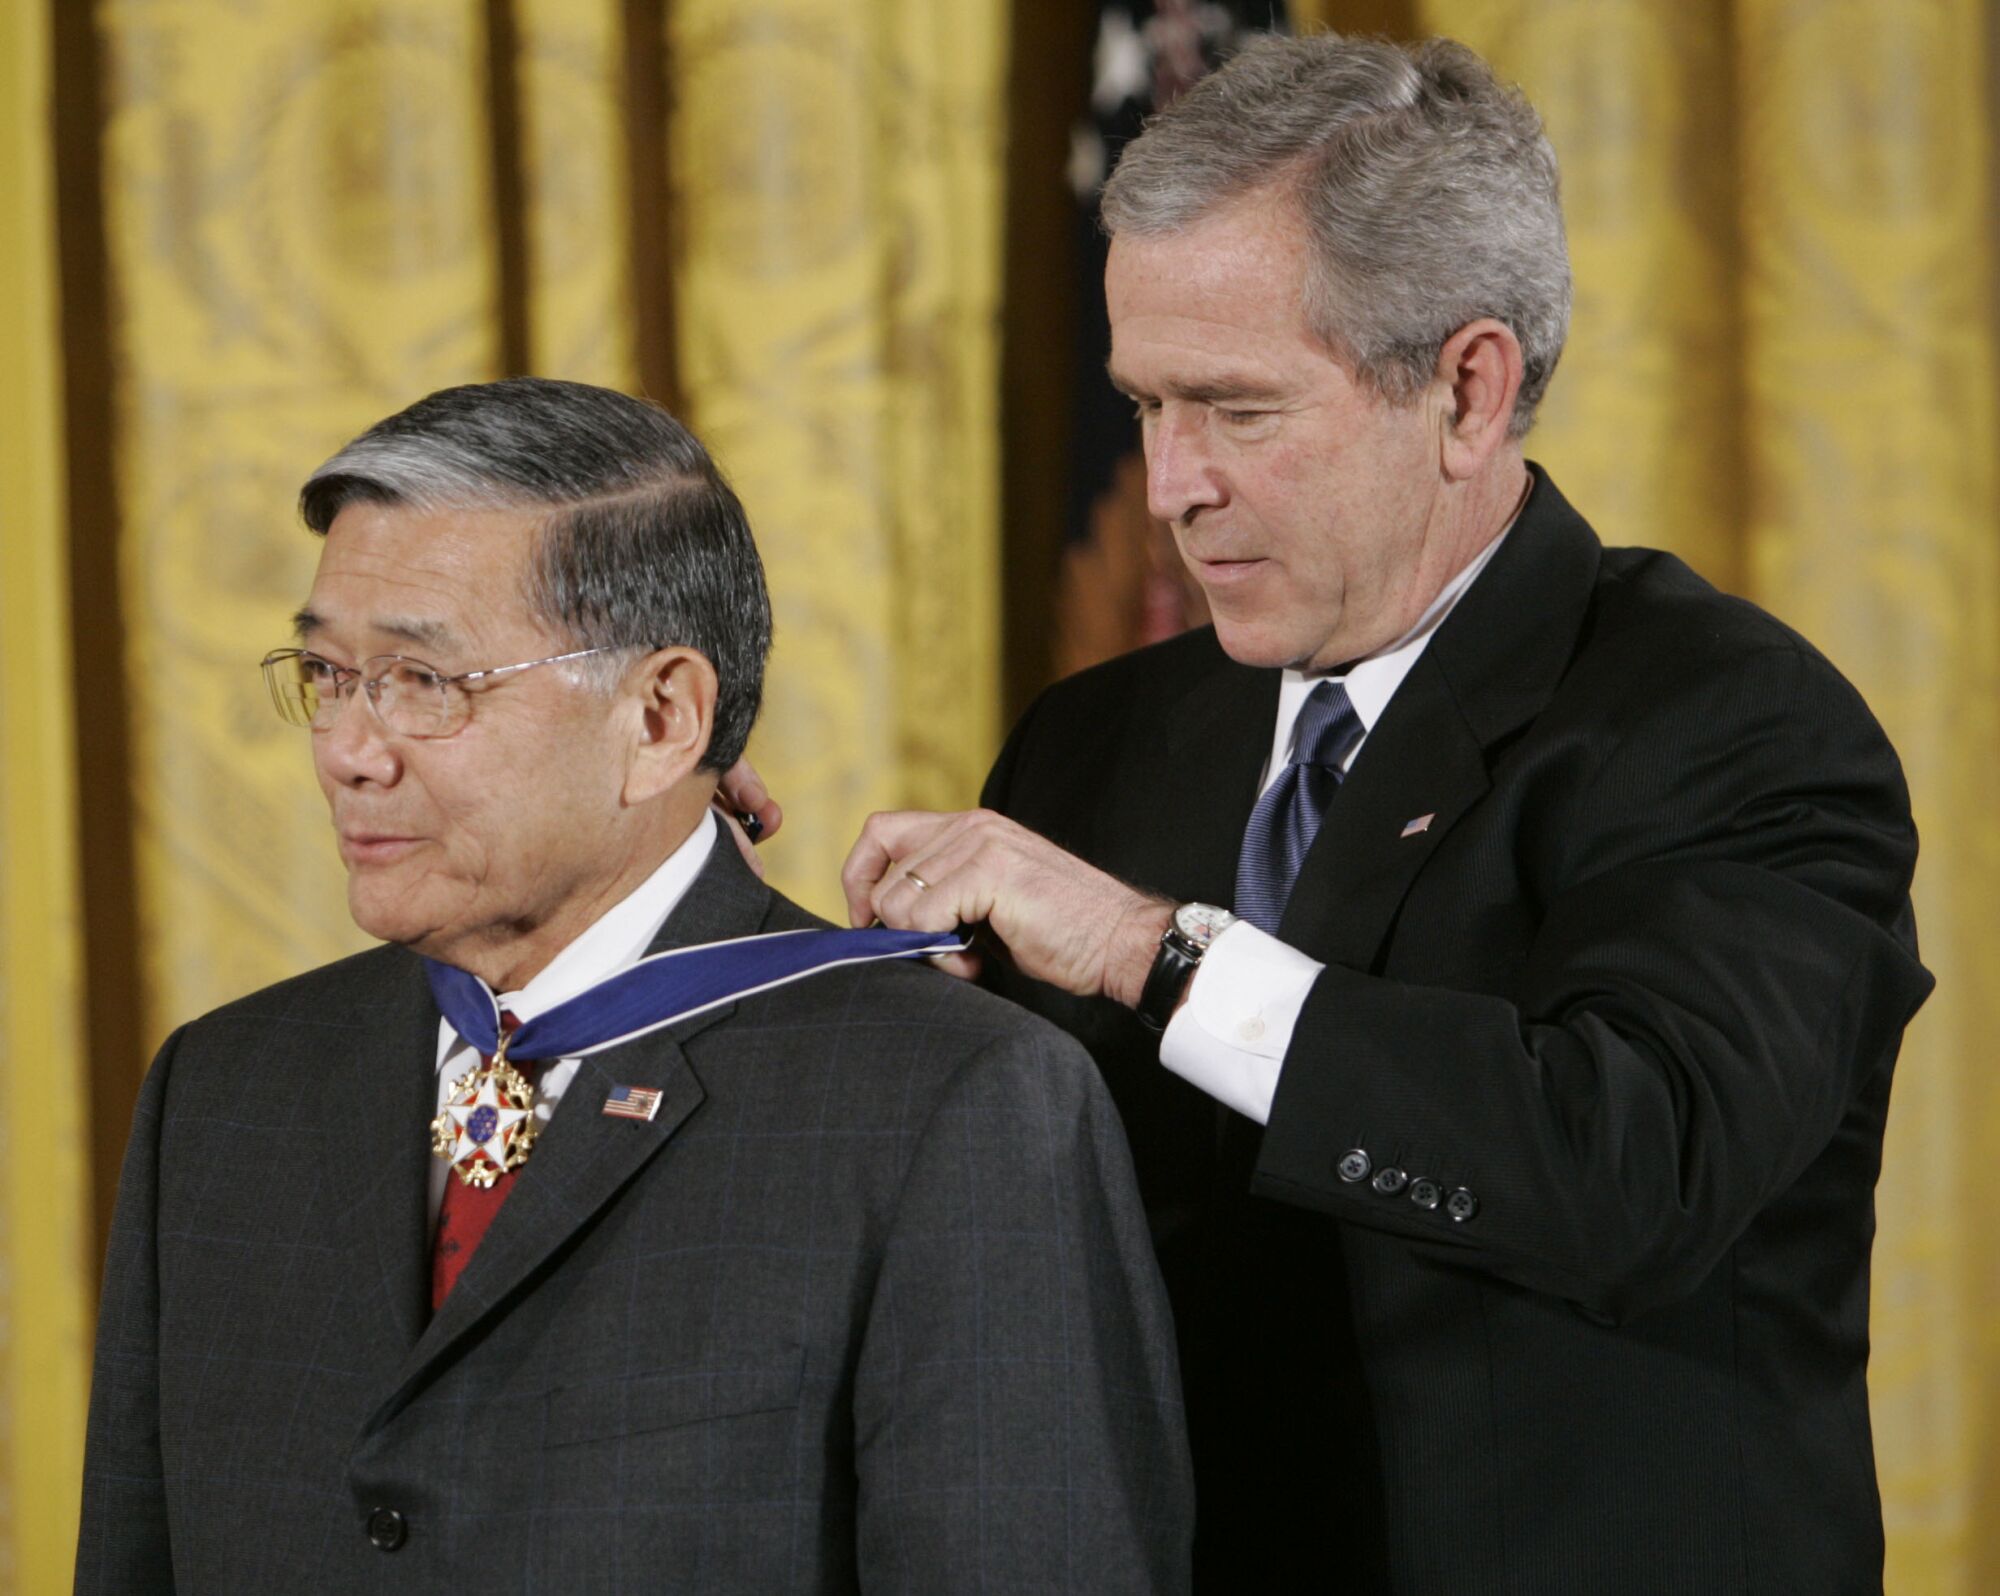 Then-President George W. Bush, right, presents the Presidential Medal of Freedom to Norman Mineta.